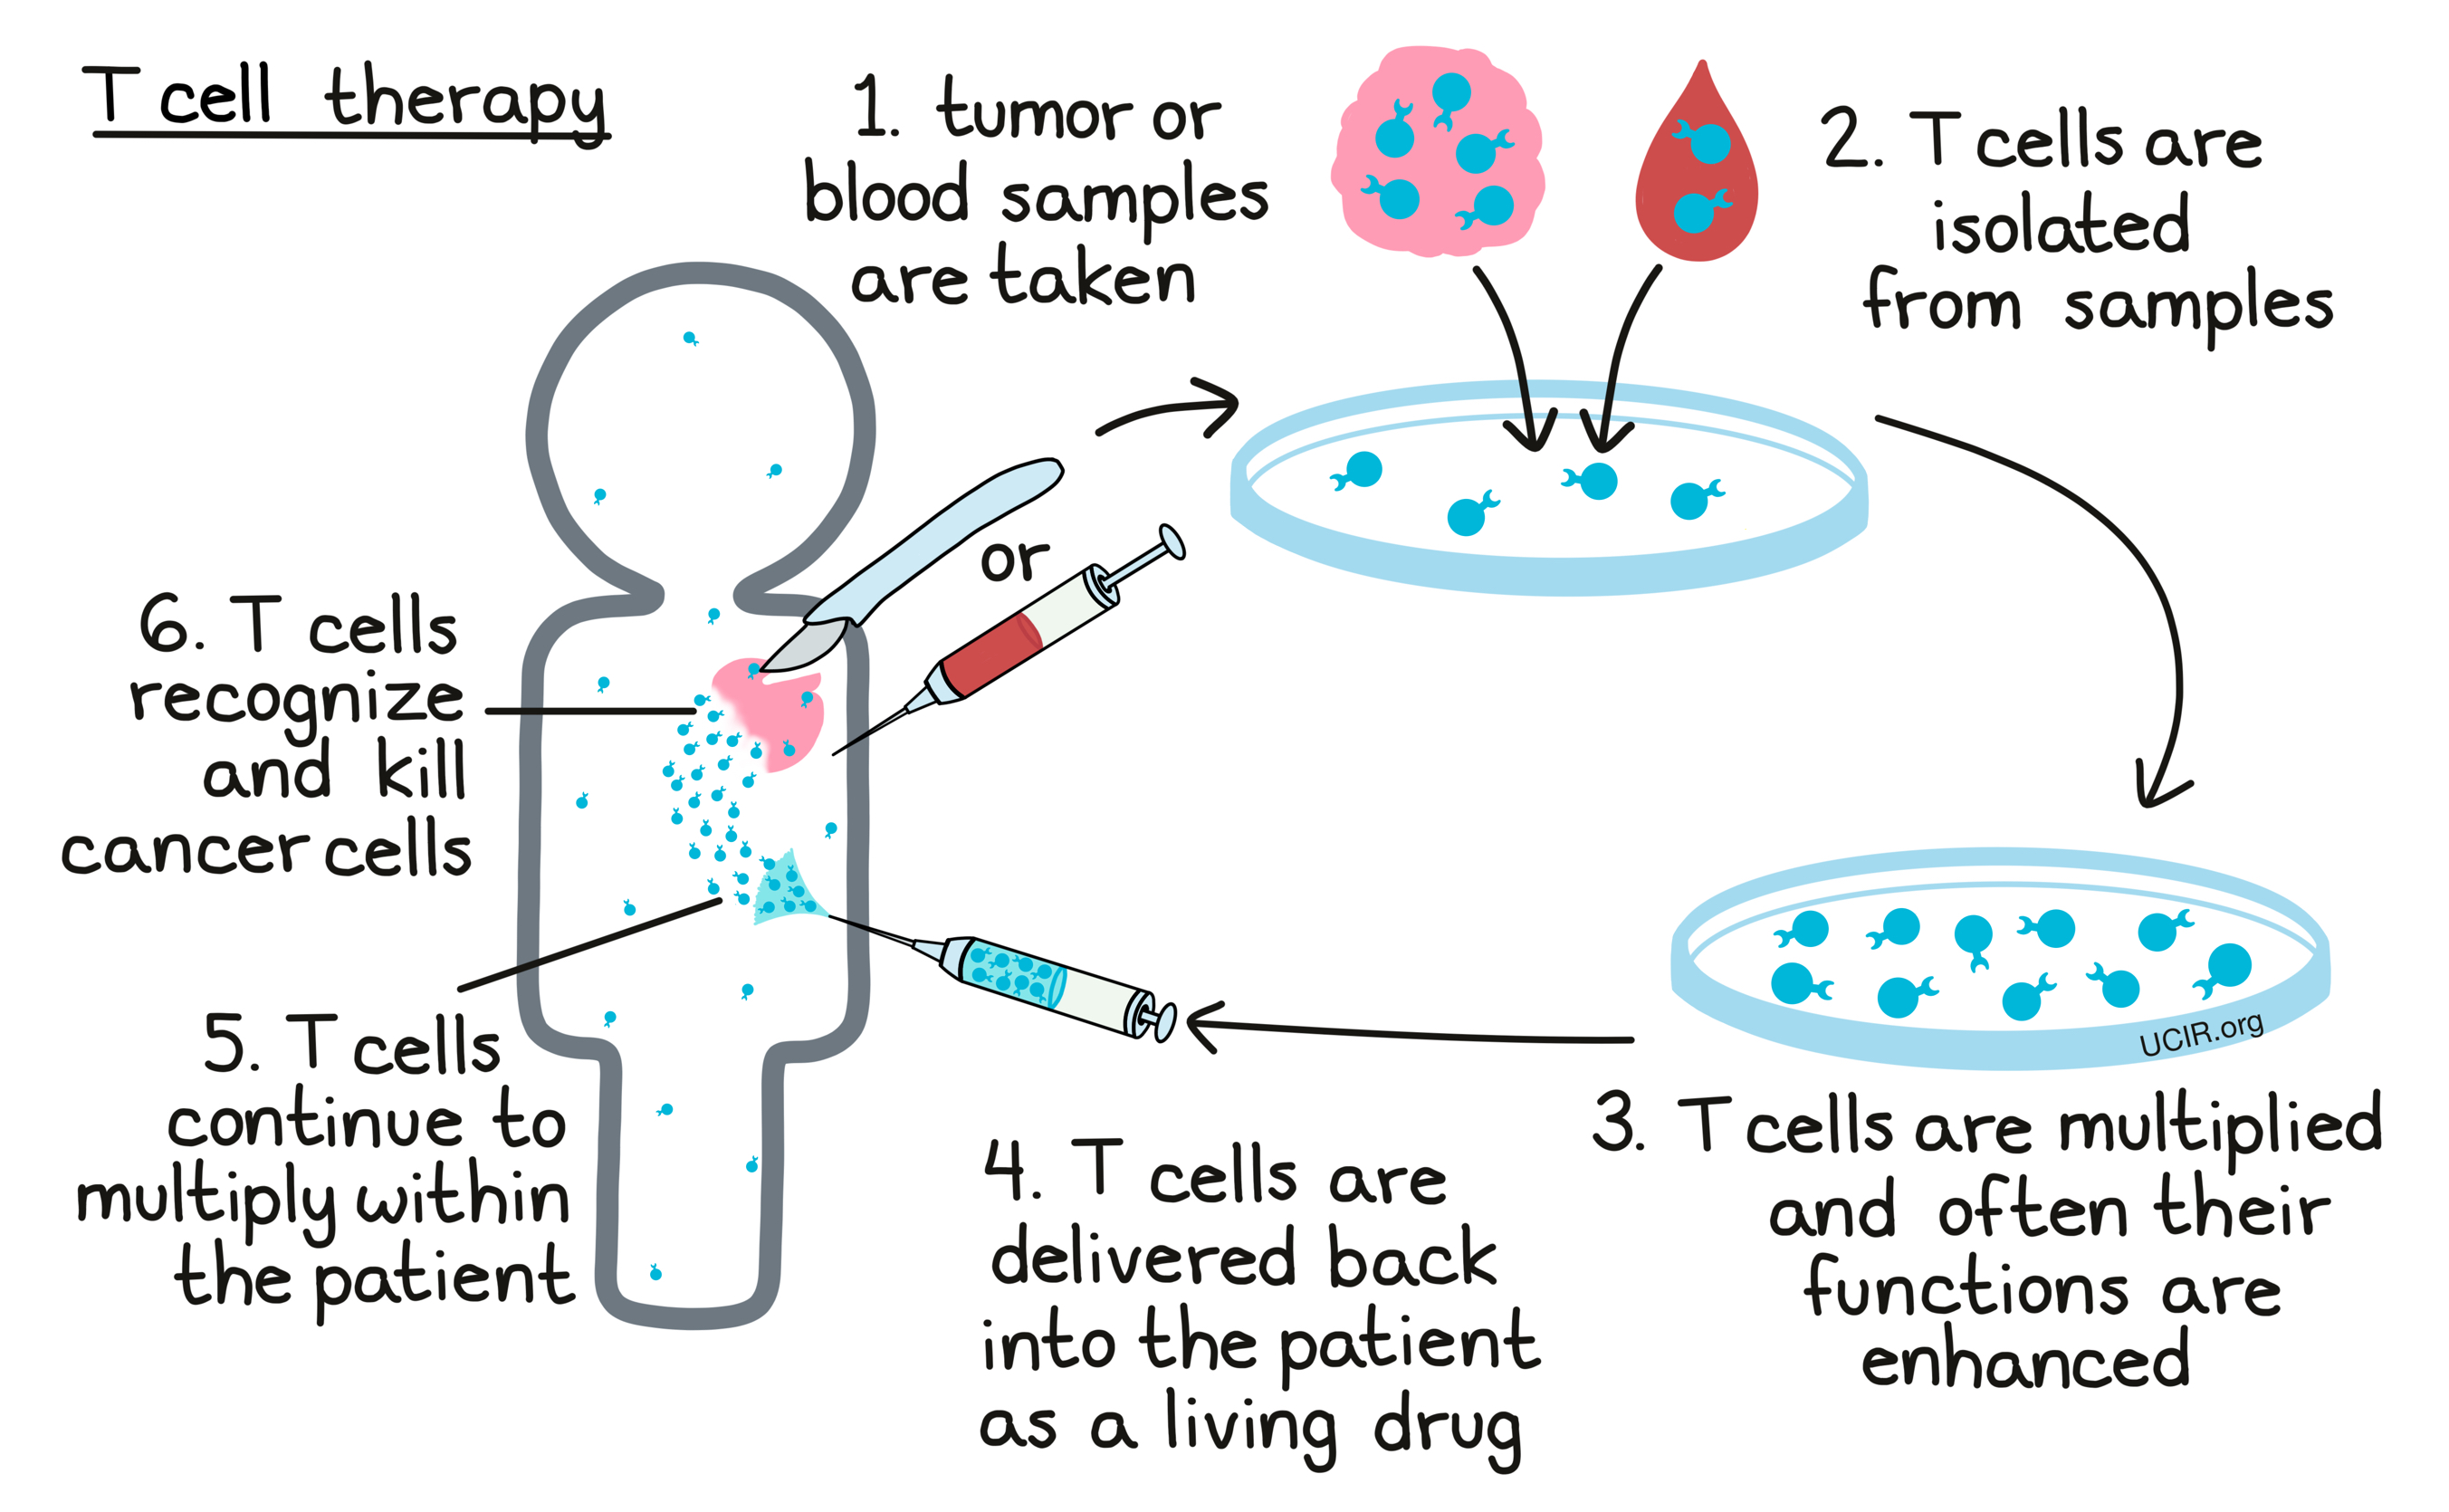 Illustration showing how T cell therapy works